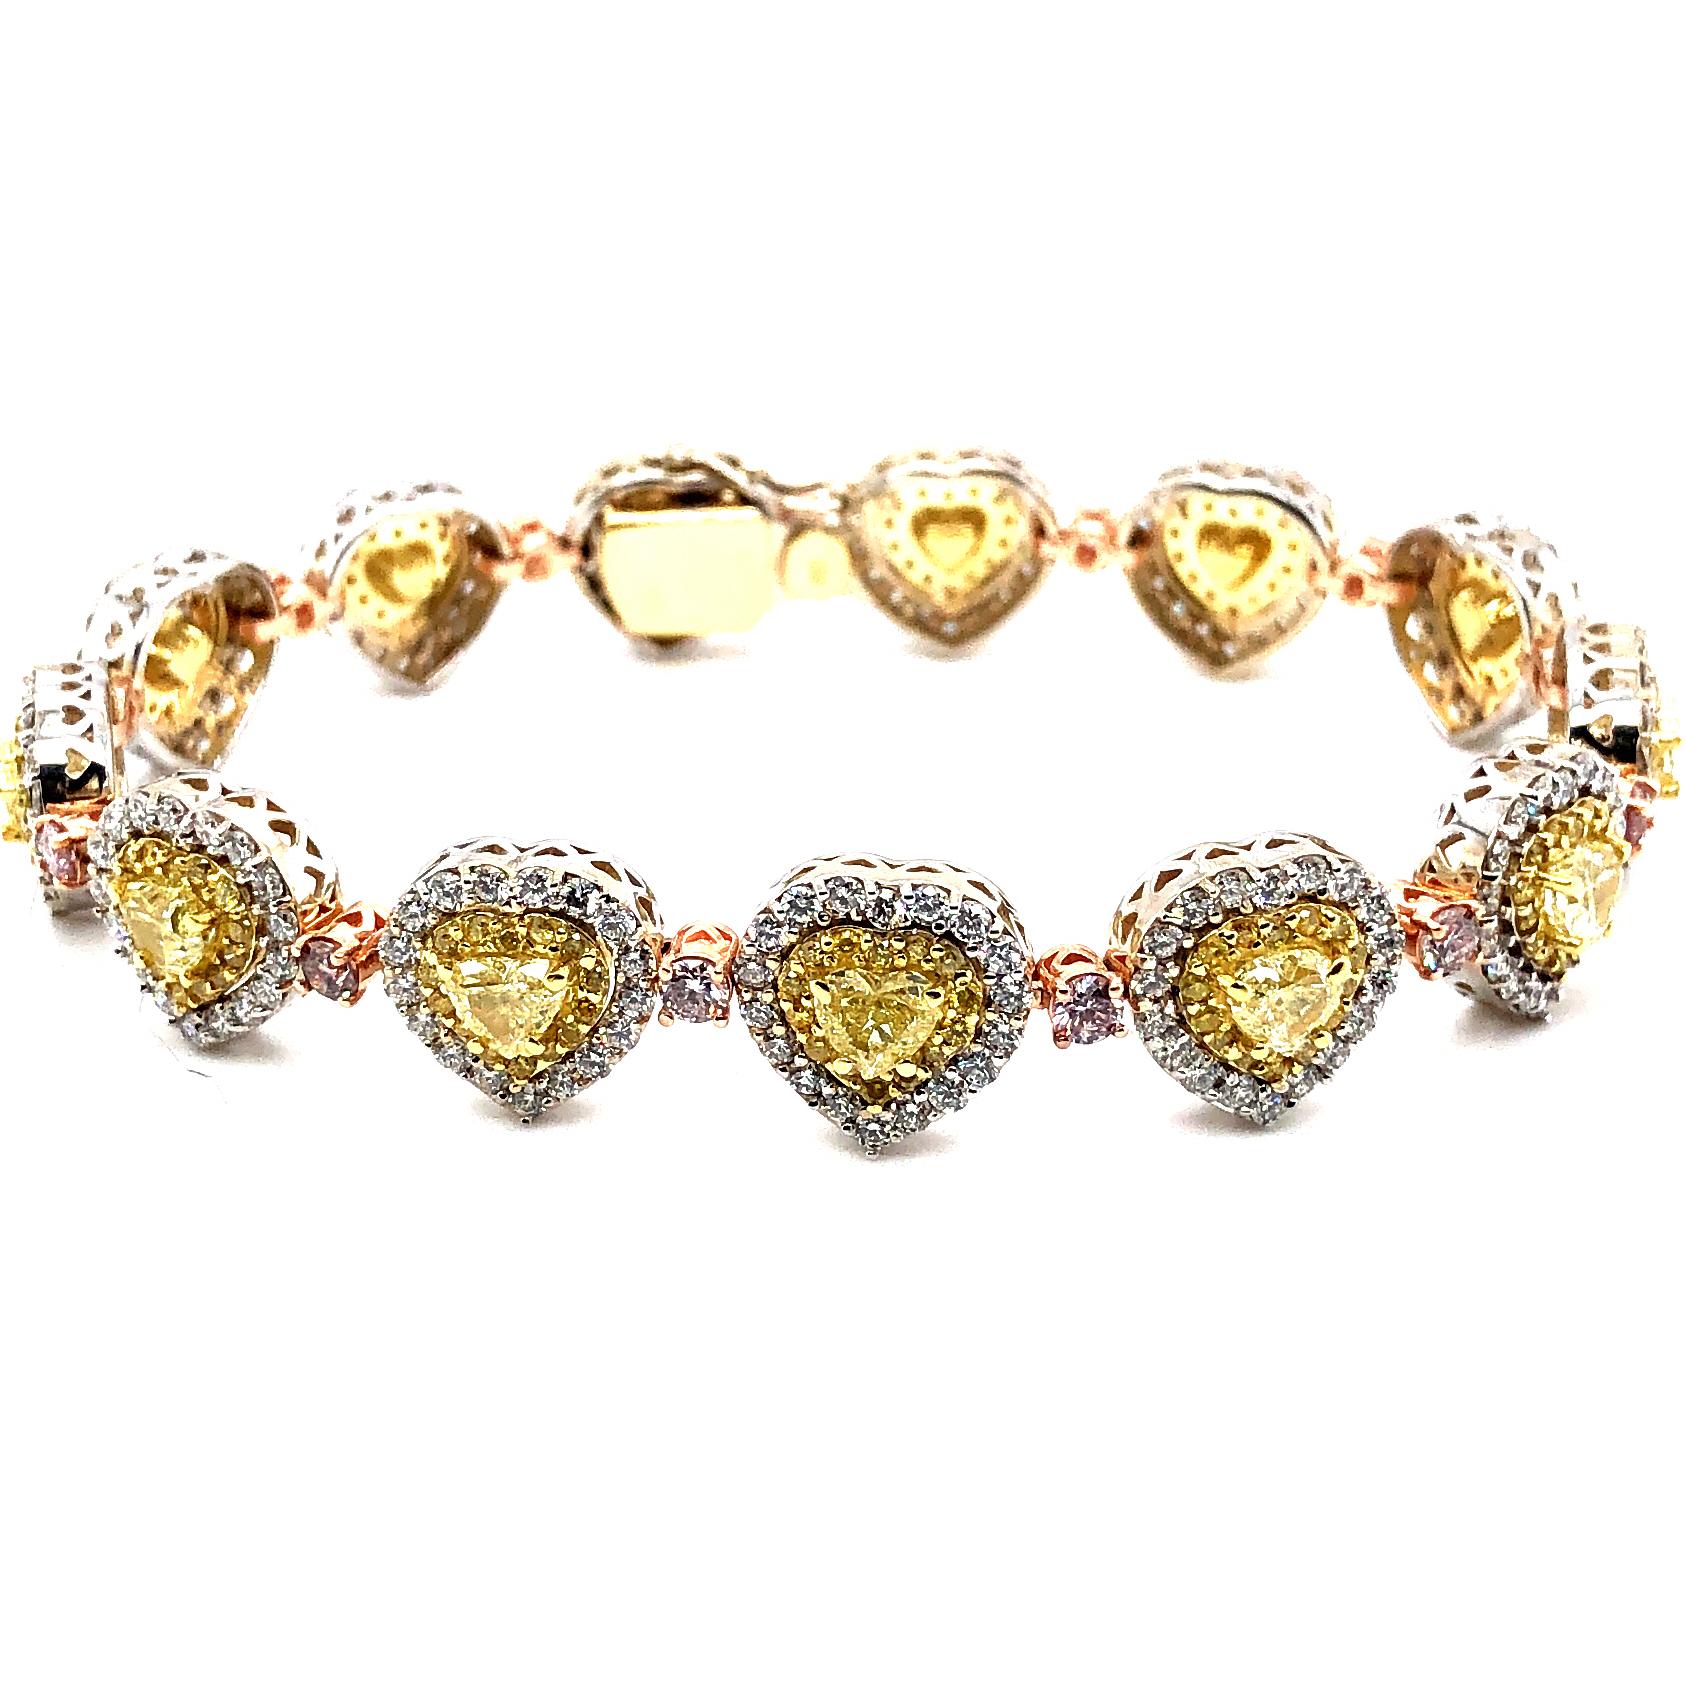 Offered here is a gorgeous three color diamond & gold bracelet. The bracelet is exceptional, it has 13 natural yellow diamonds hearth shaped Vs2-Si1 clarity with an approximate total weight of 3.80 carat, 182 natural yellow round brilliant cut